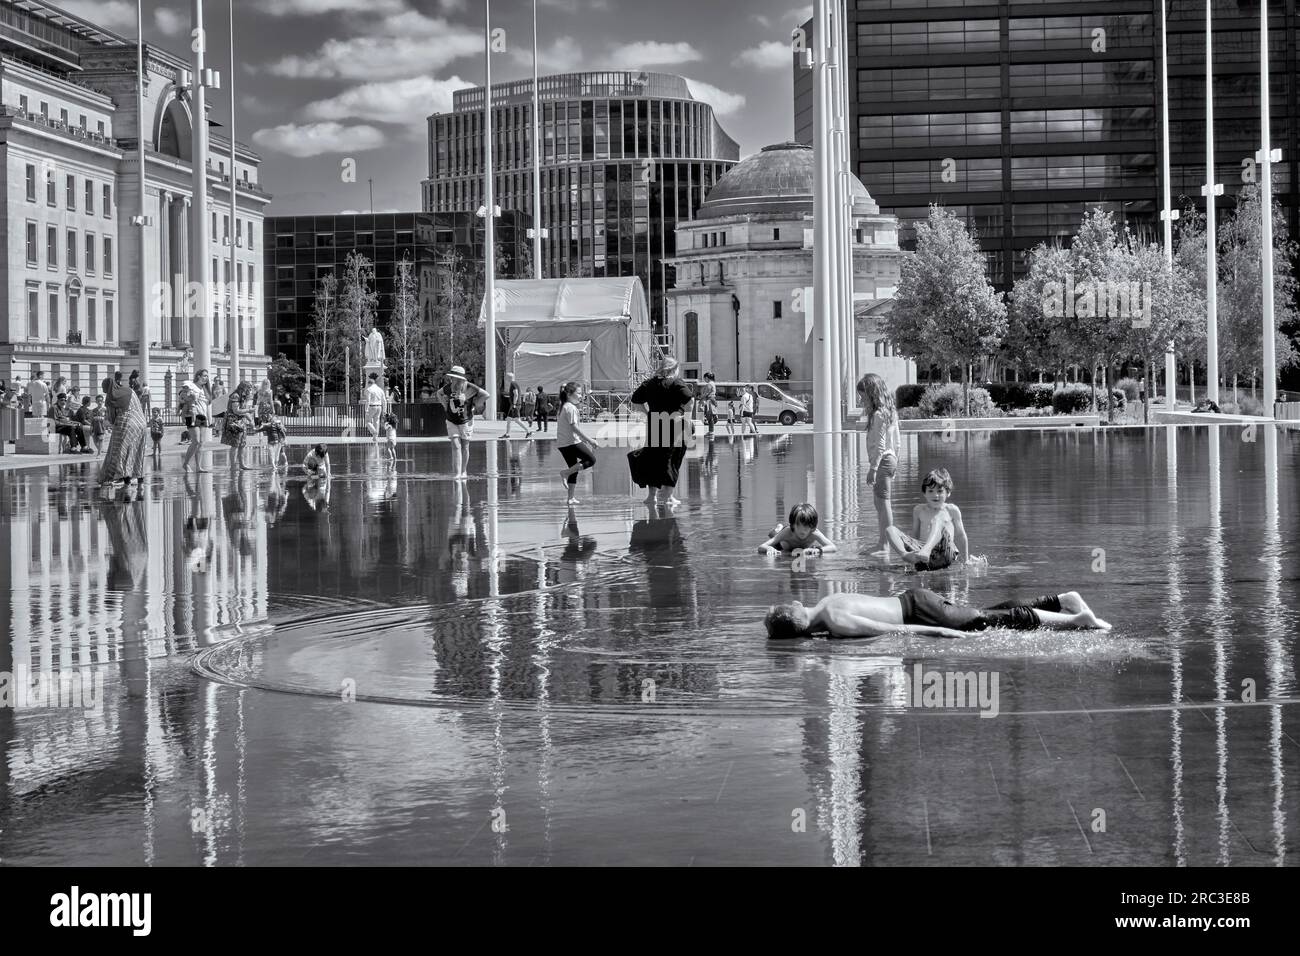 Centenary Square, Birmingham with children cooling off in the water from a summer heatwave, England UK Black and white photography Stock Photo